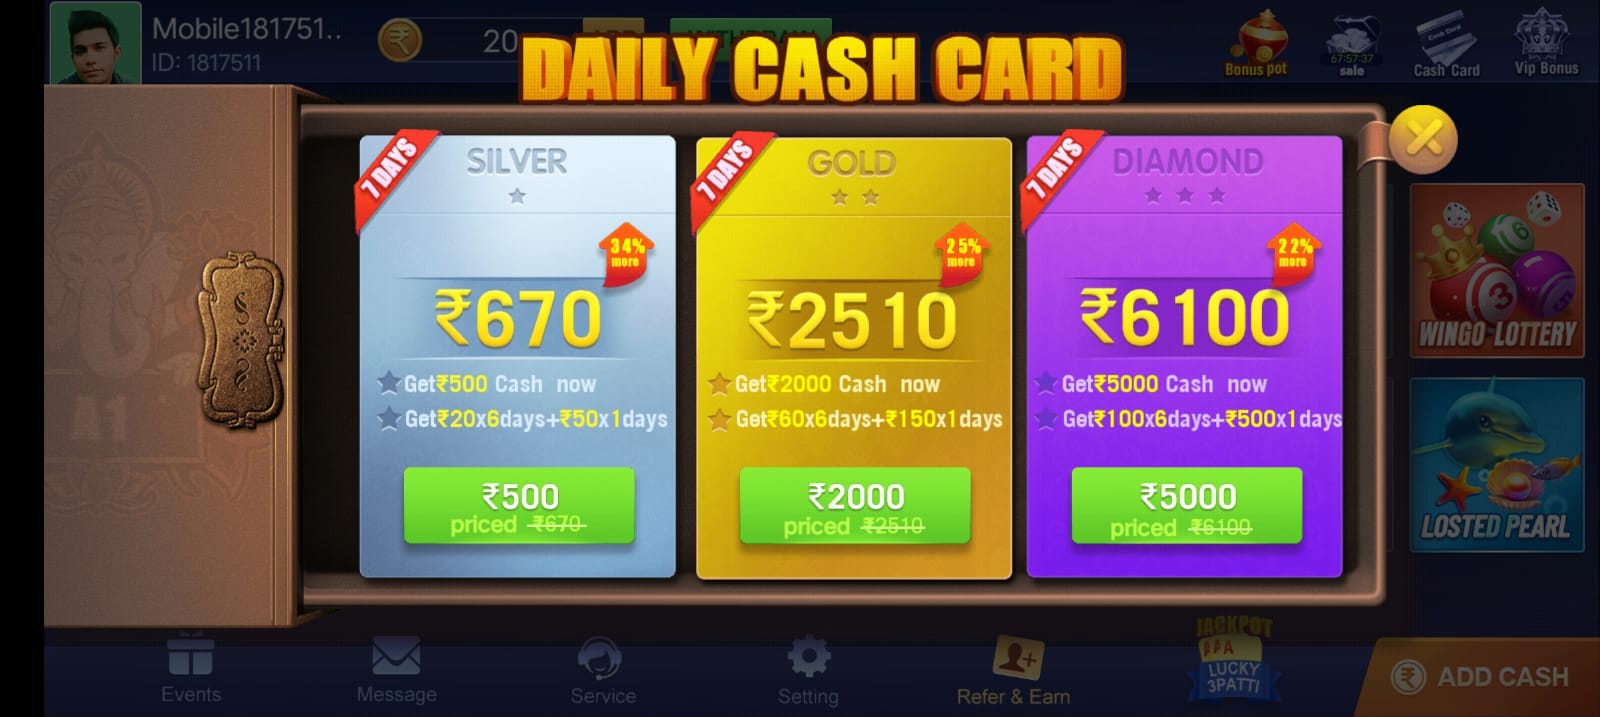 Daily Cash Card In Rummy Soft Application